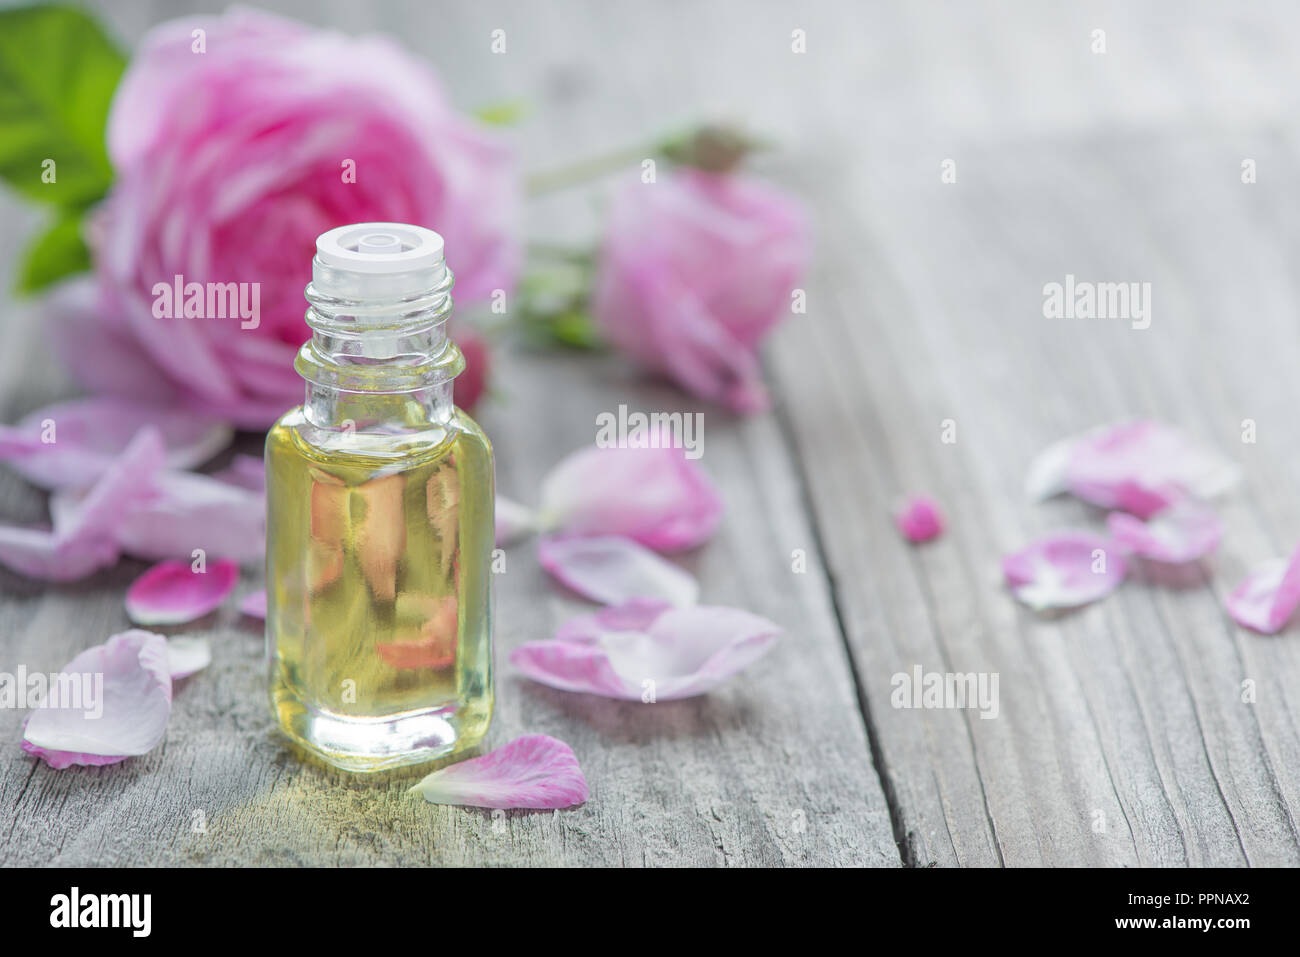 Glass vial with rose essential oil and flower of pink rose on a wooden background with copy-space Stock Photo